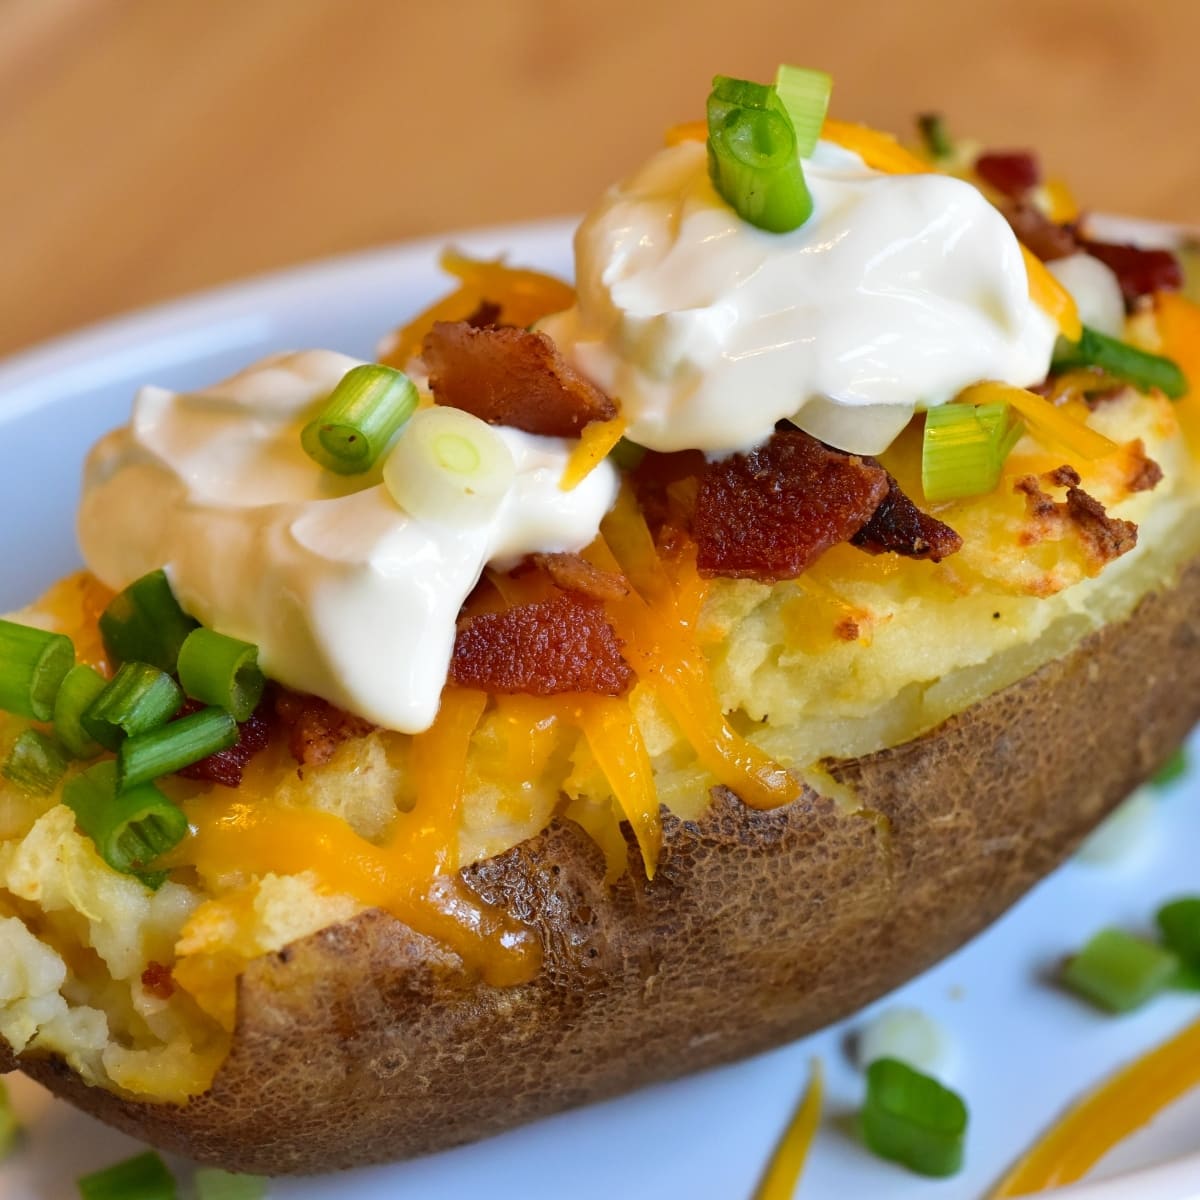 Air fryer baked potato close up topped with shredded cheese, chopped bacon, sour cream and sliced green onions.